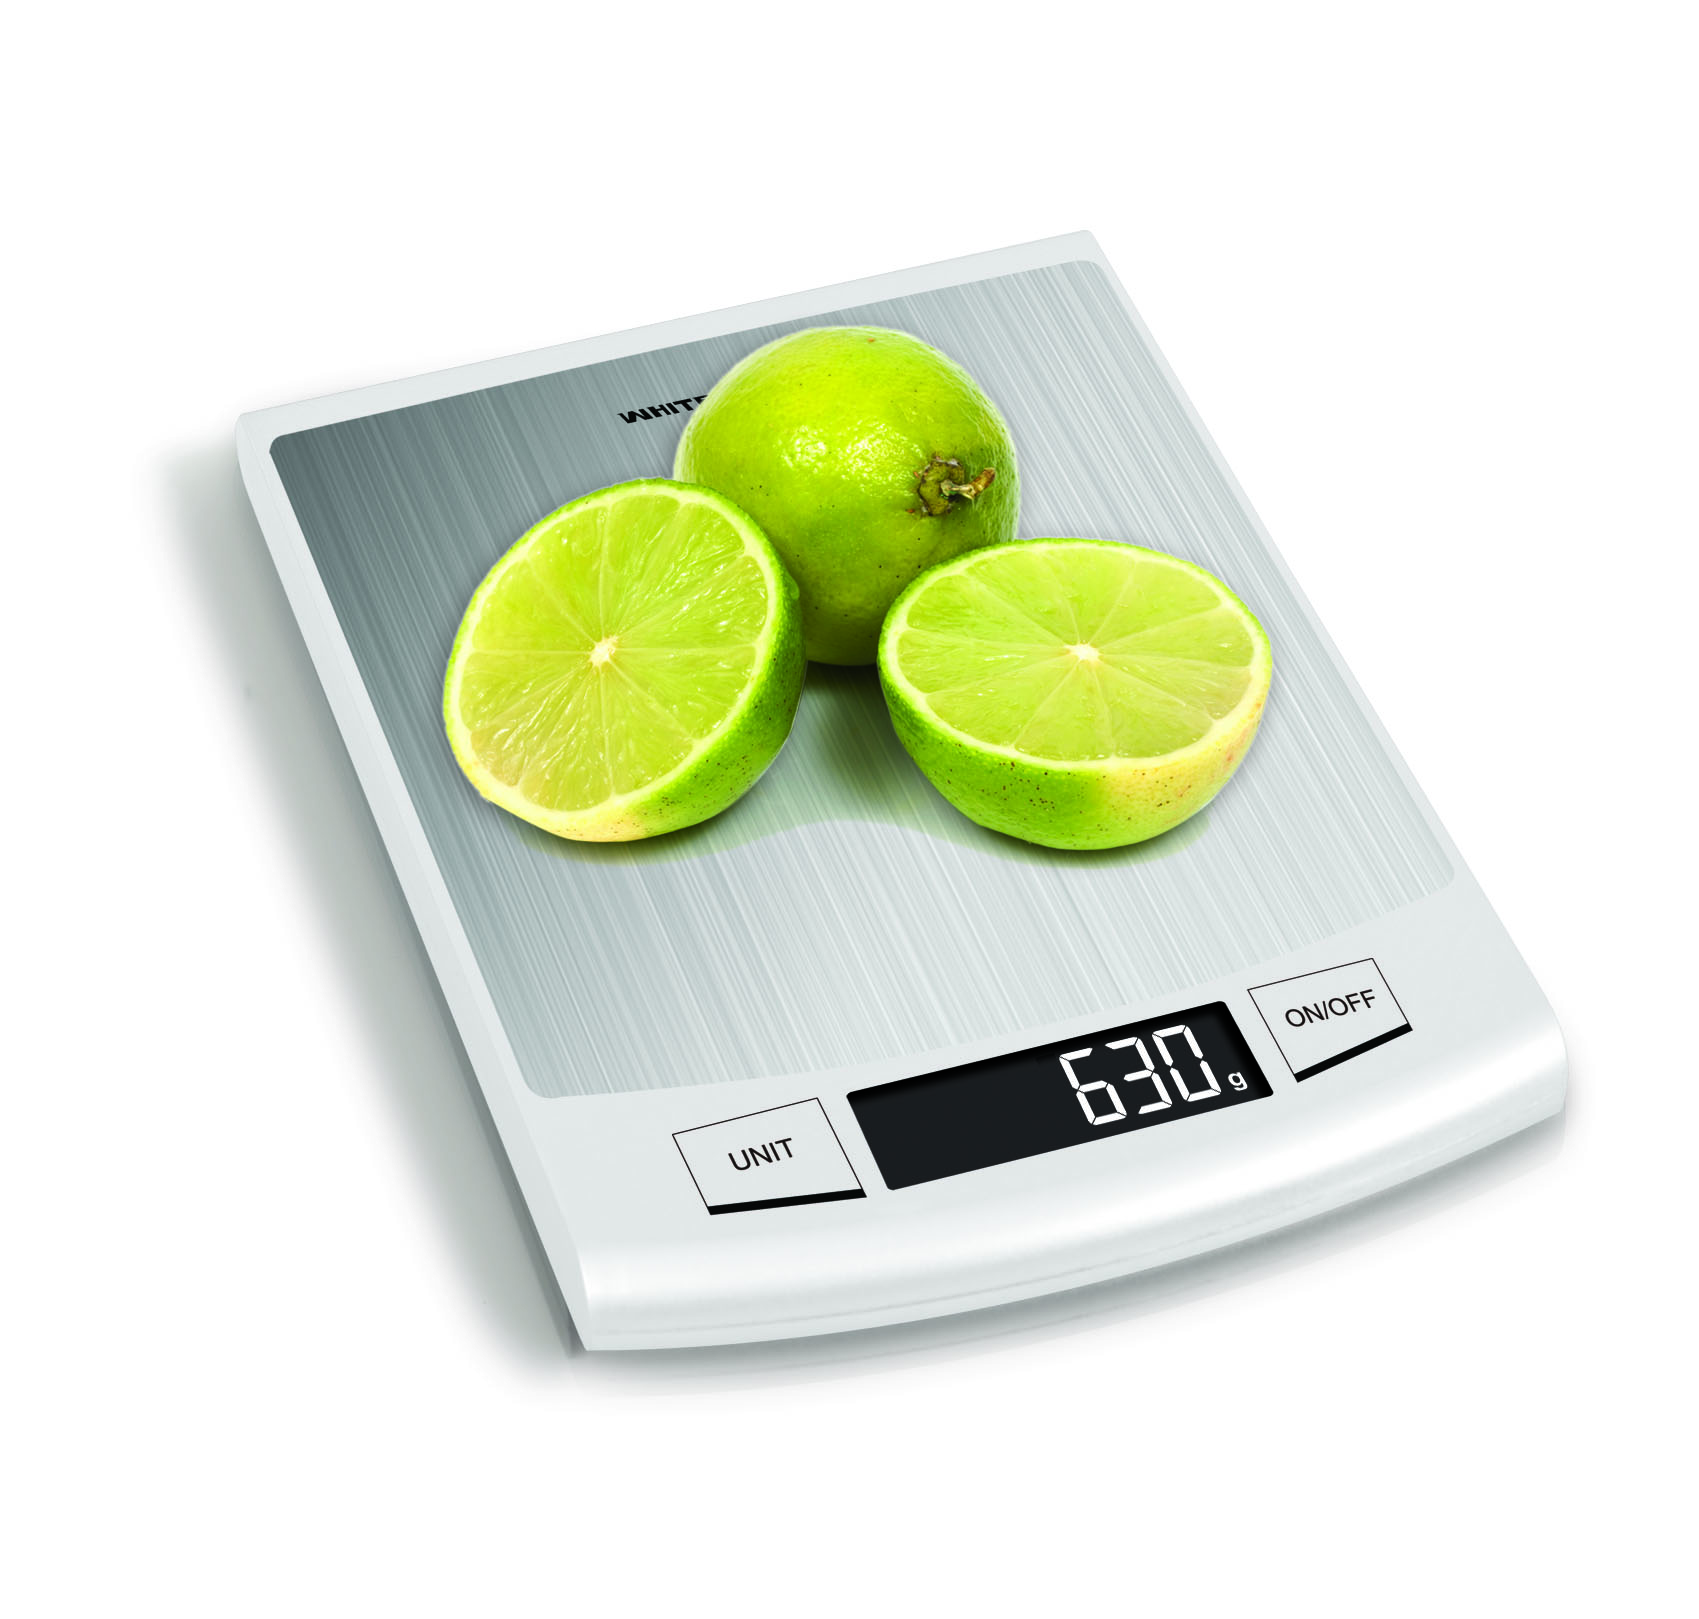 Stainless steel kitchen scale with touch sensor LCD display